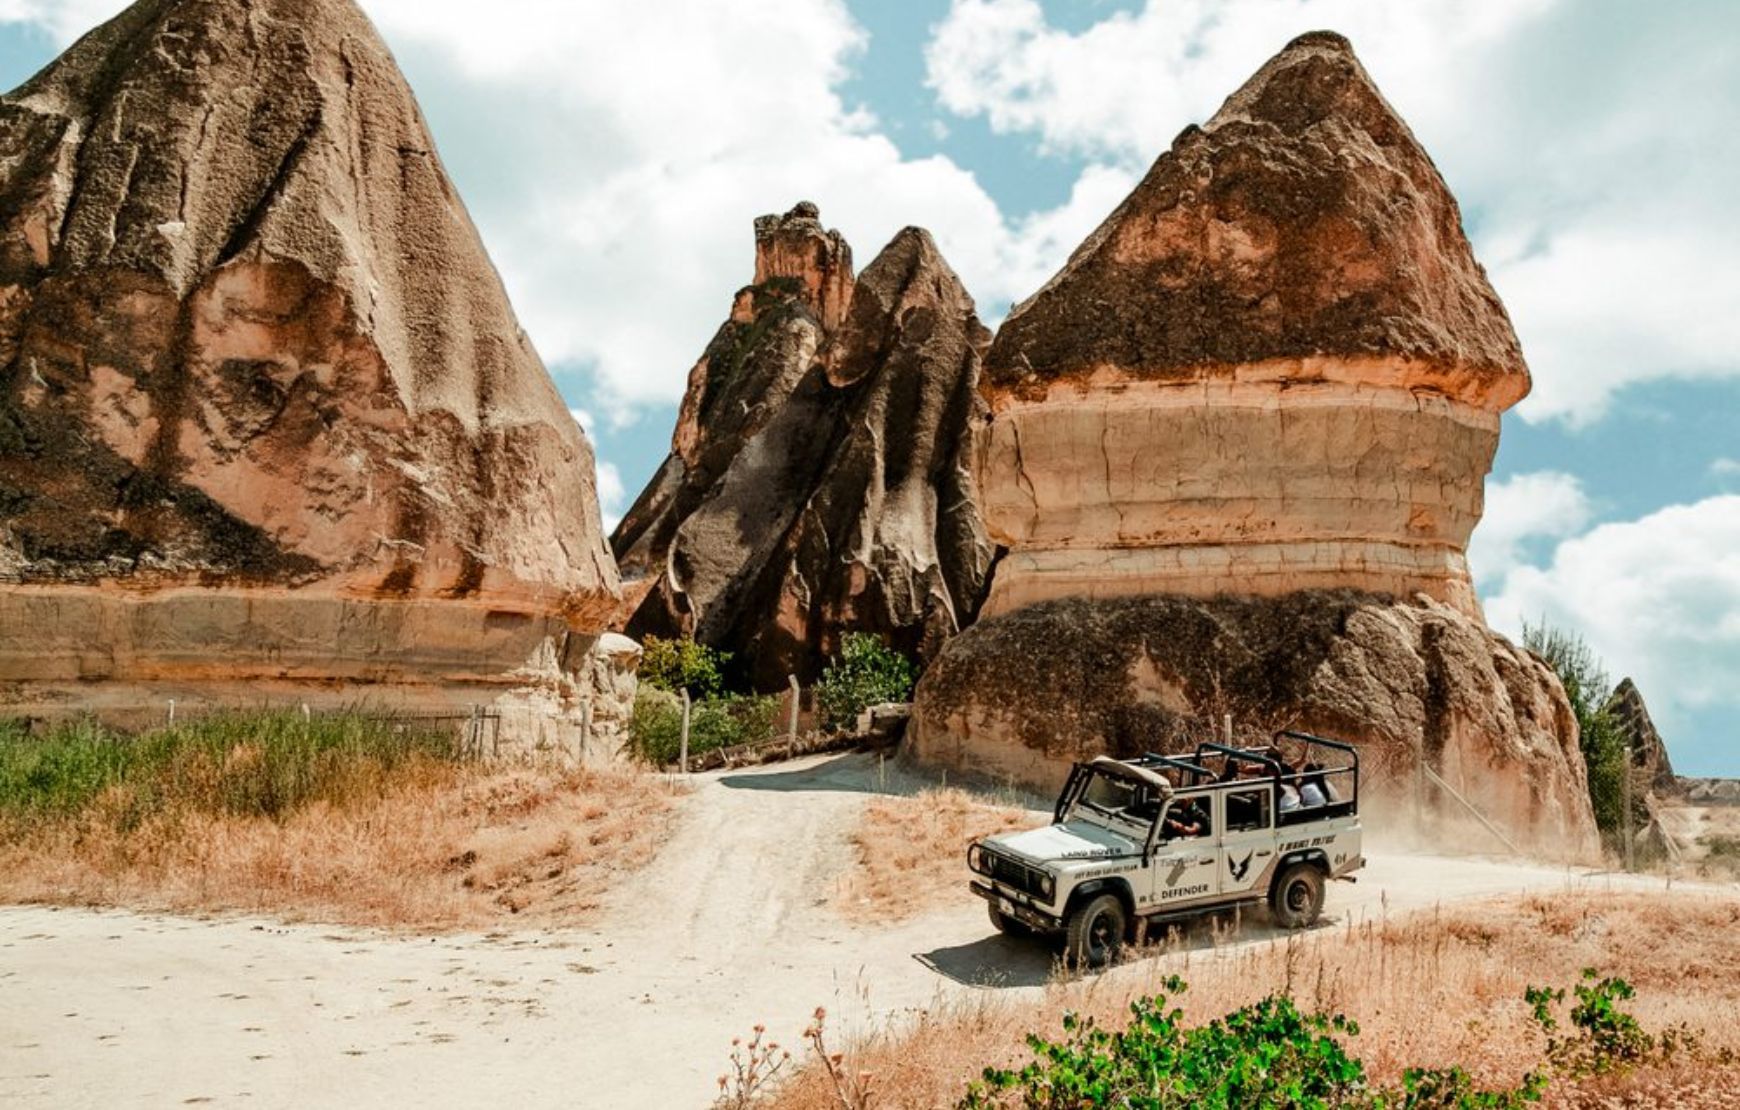 Jeep Safari in Cappadocia in our From the Coast to the Caves: A Turkey Tour